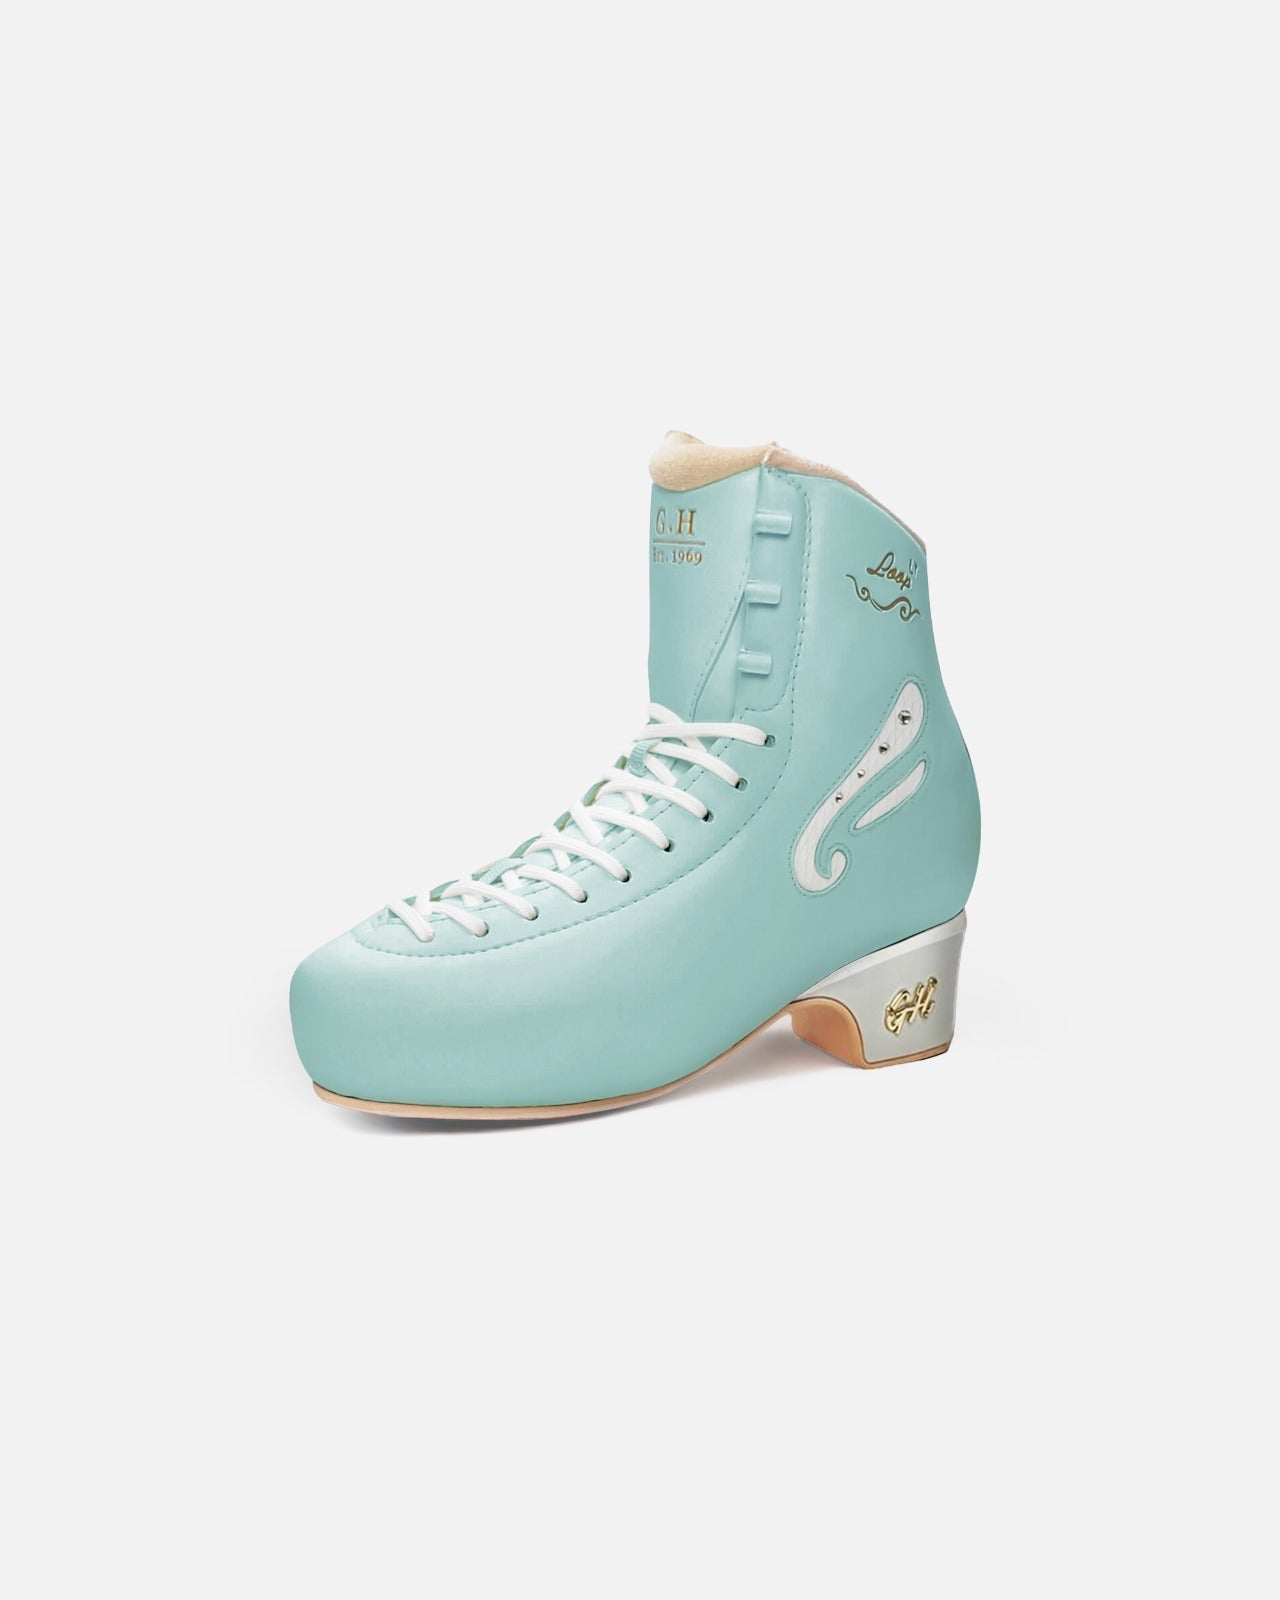 Loop Lt Ice Skates (Boots Only)